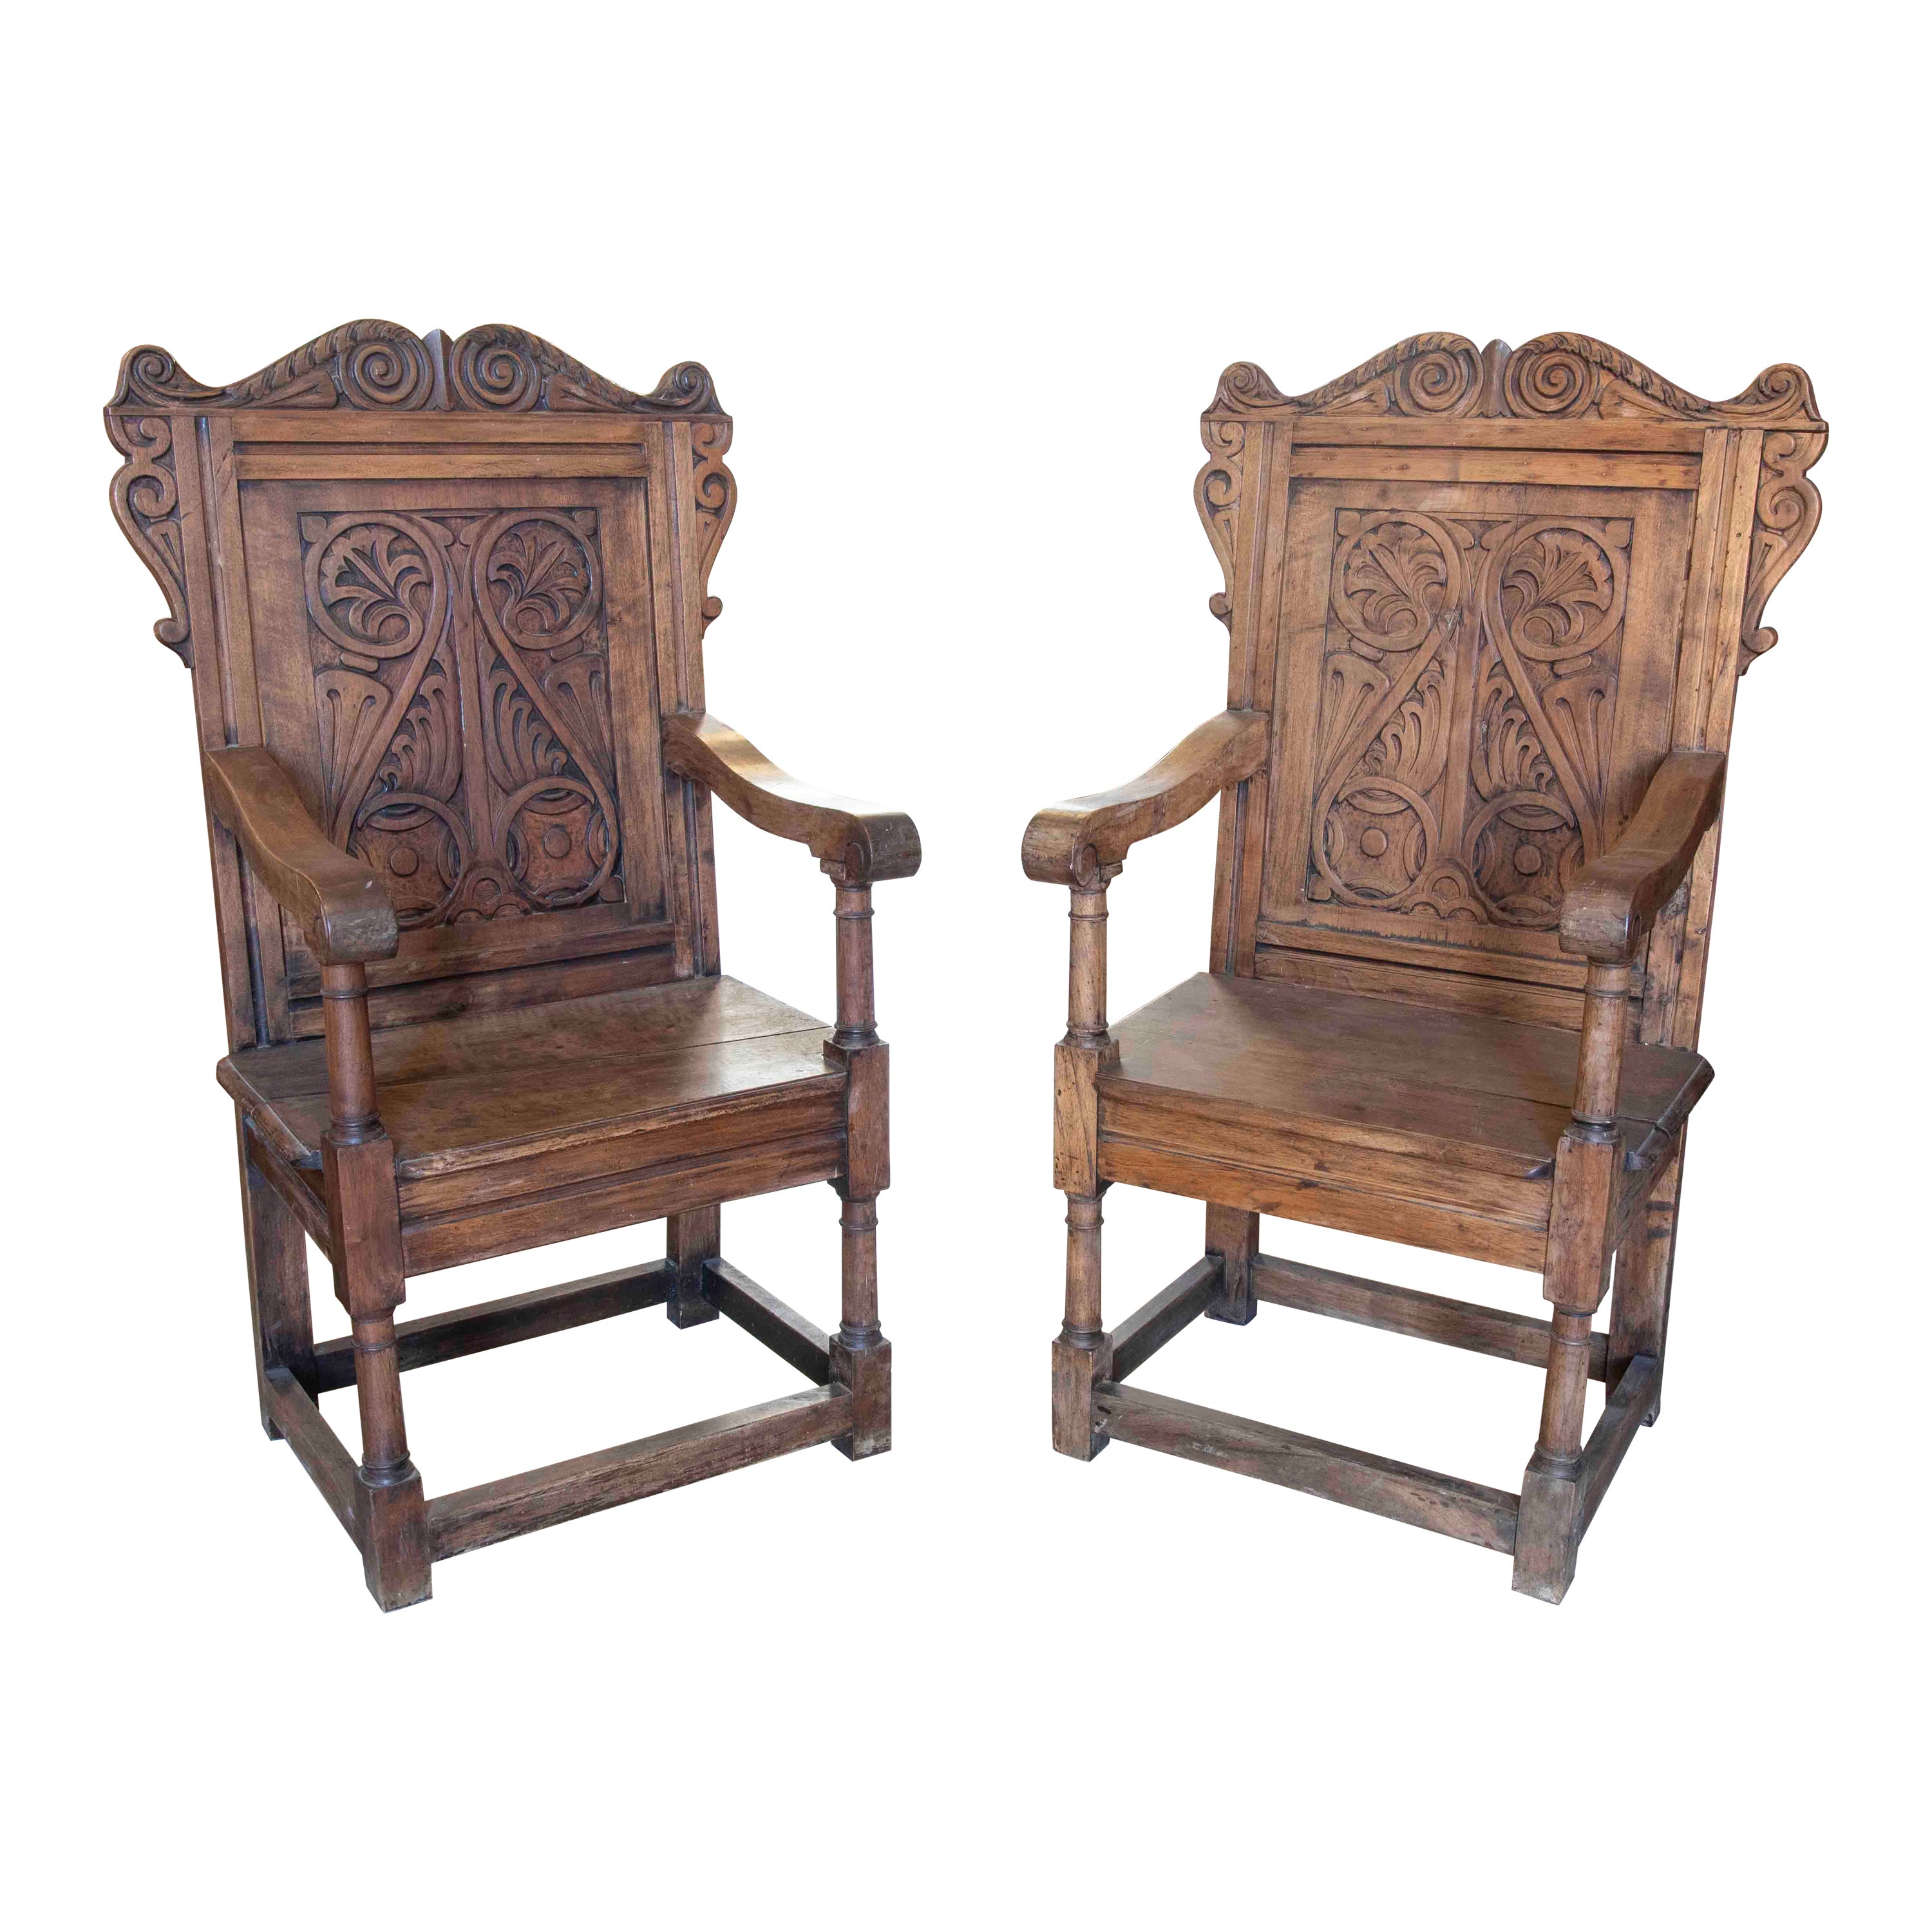 English Pair of Wooden Armchairs with Carved Vegetable Decoration For Sale